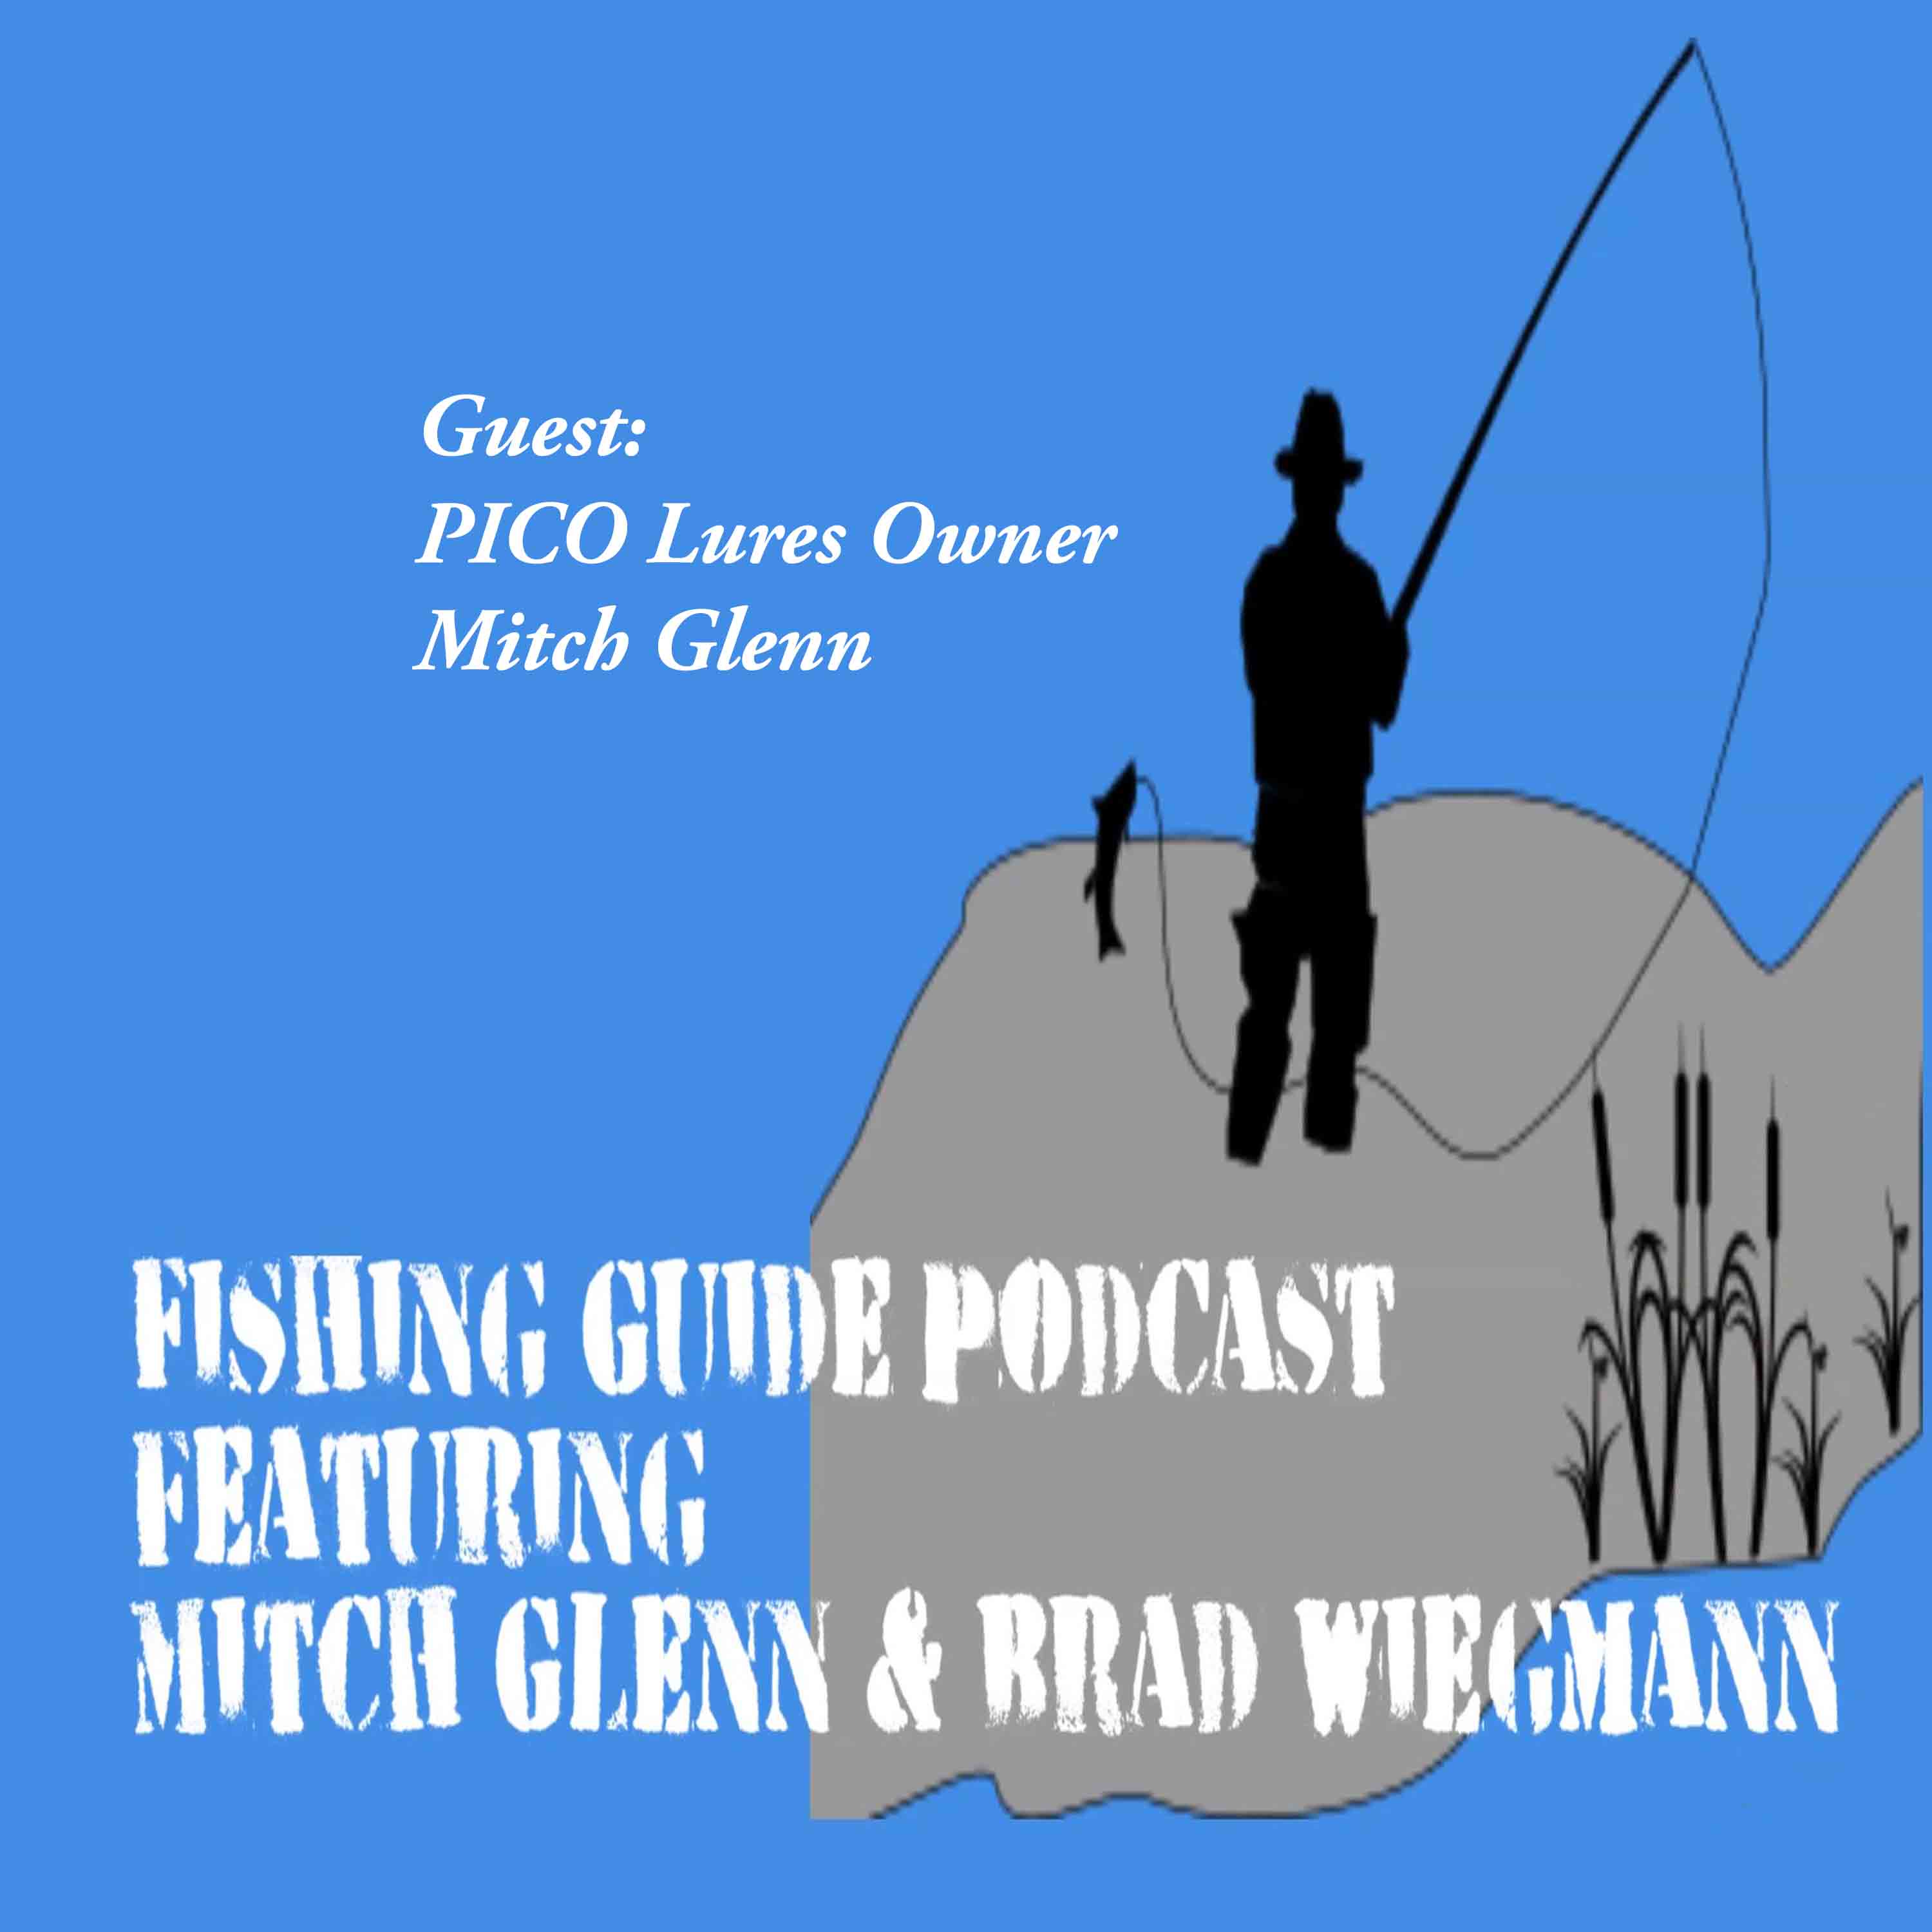 Mitch Glenn owner of PICO Lures talks to co-host Brad Wiegmann about the history and currently what is happening with PICO Lures